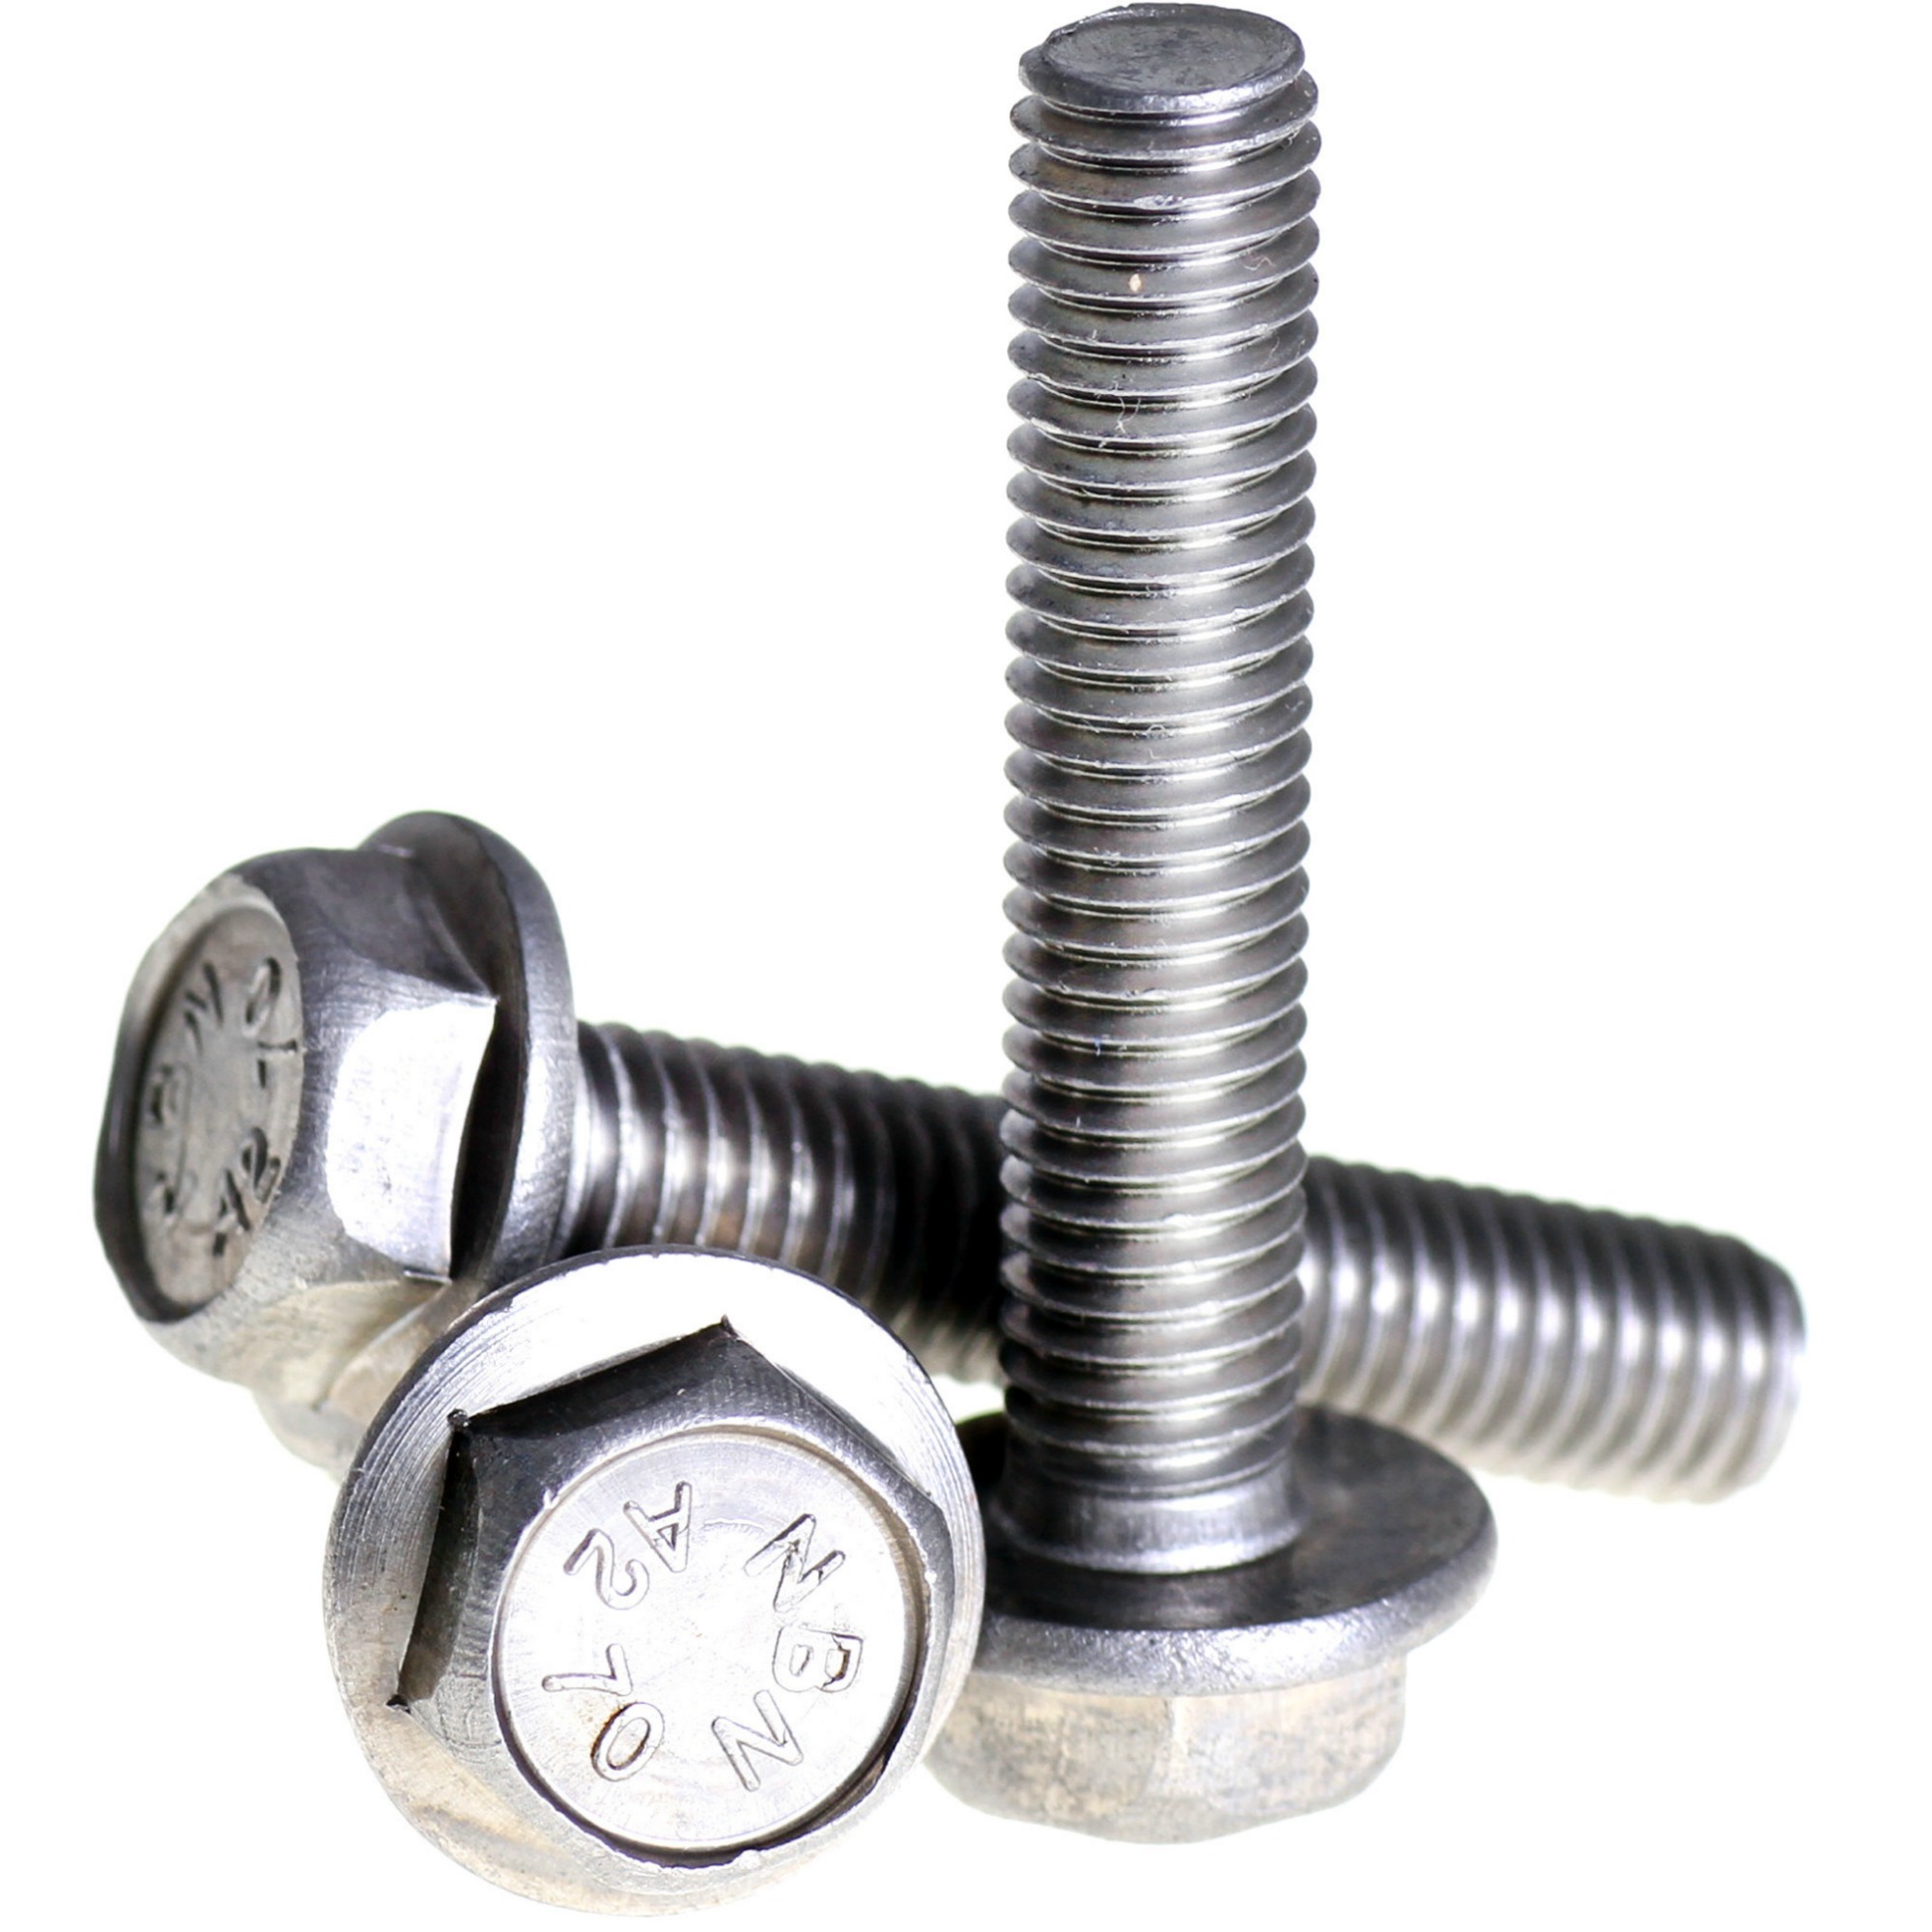 6mm M6 A2 STAINLESS STEEL FLANGED HEX HEAD BOLTS FLANGE HEXAGON ...